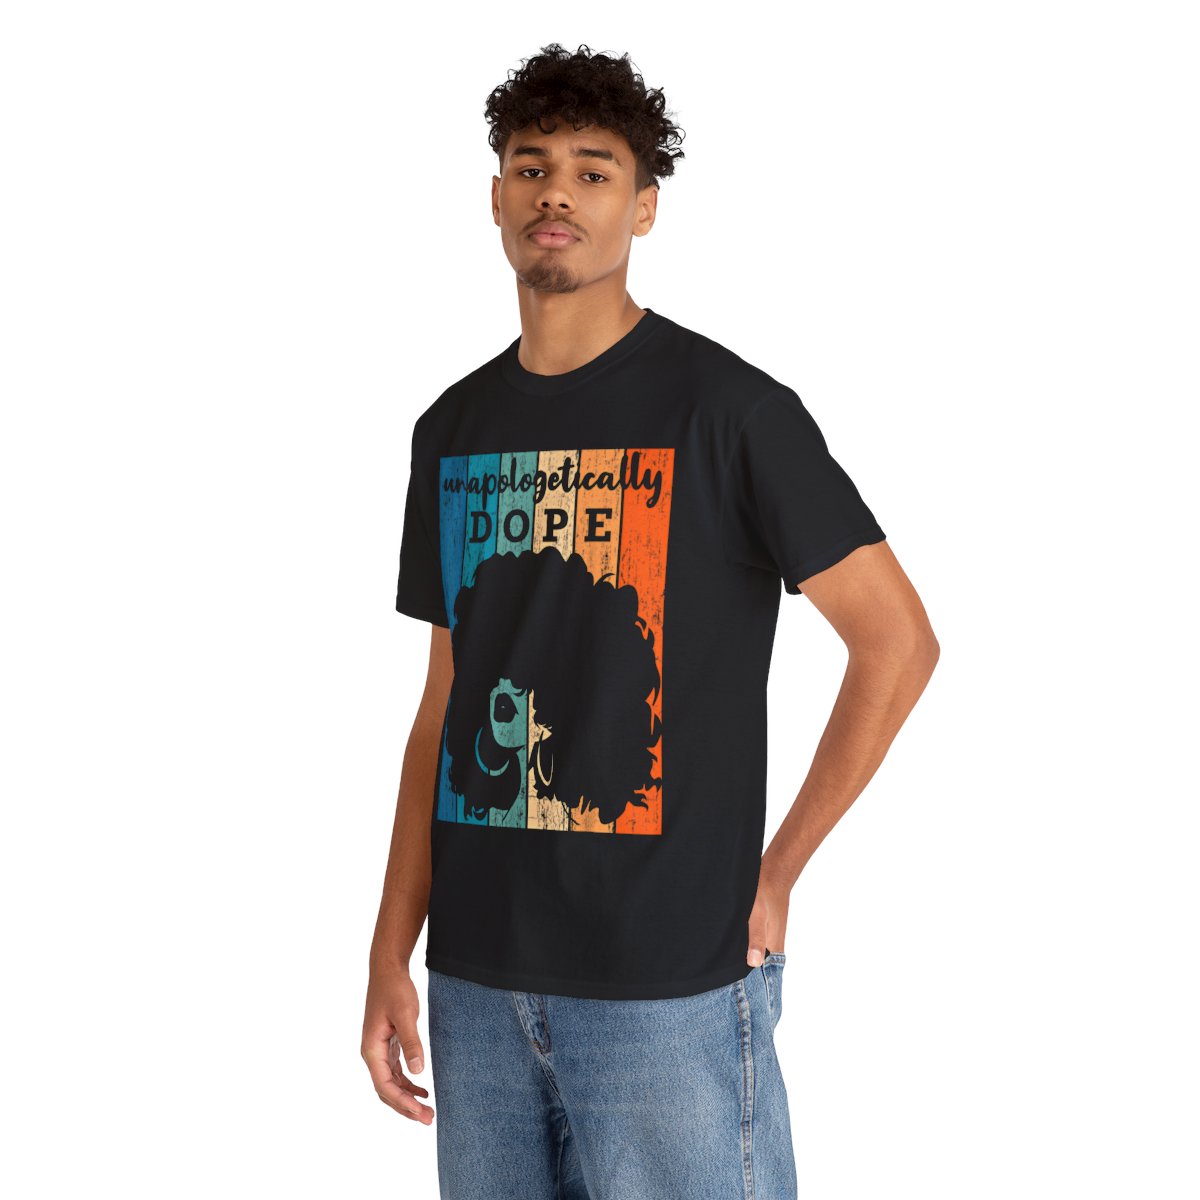 Unapologetically Dope Black History Month African American Graphic T-Shirt